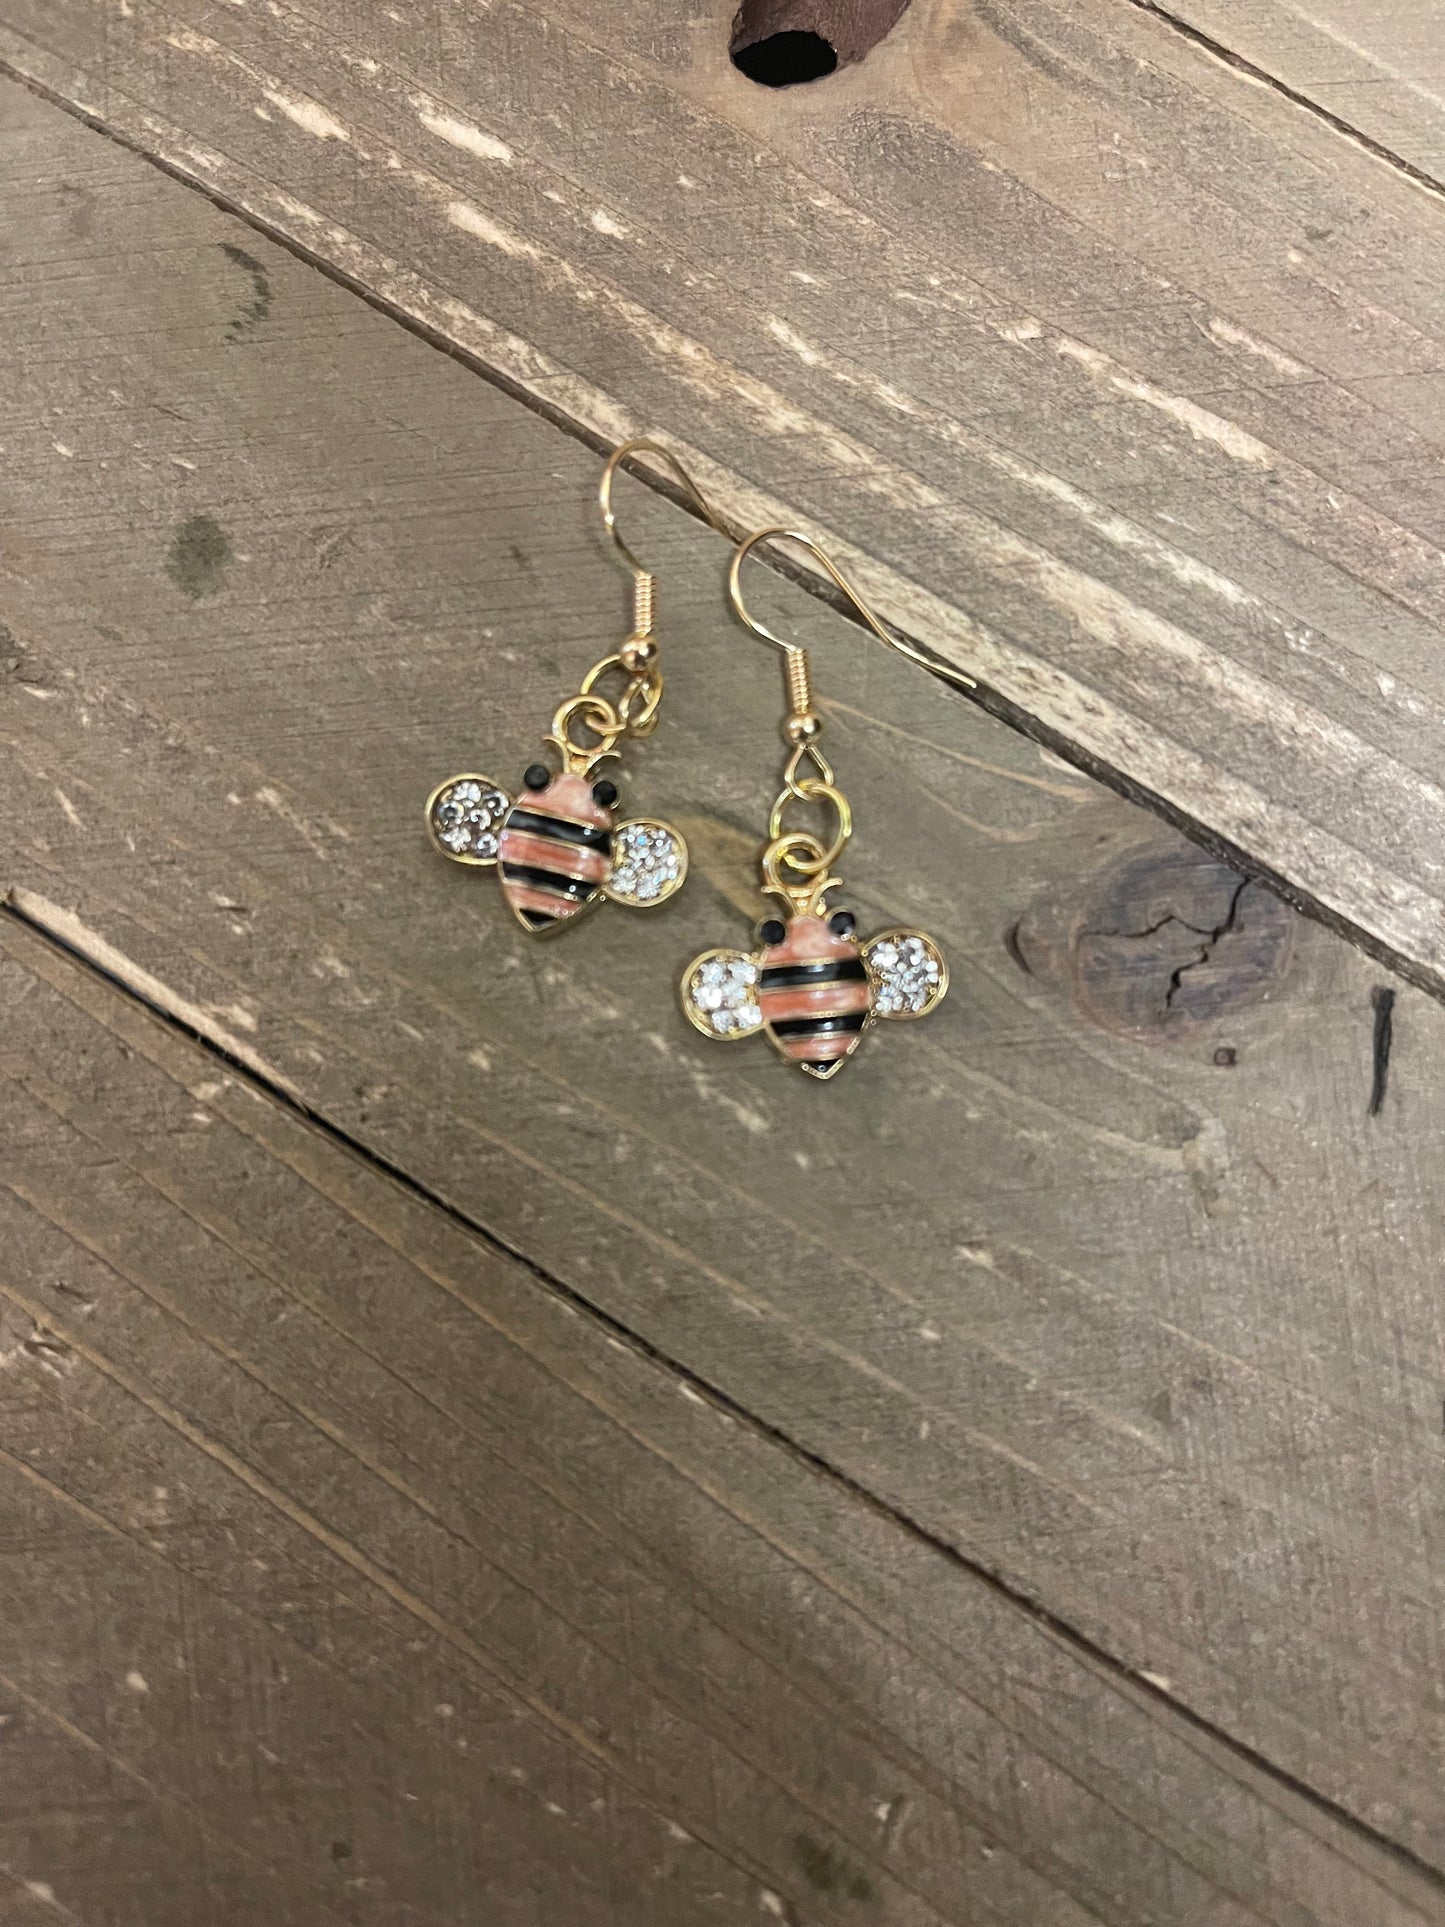 Bumble Bee charm wire earrings